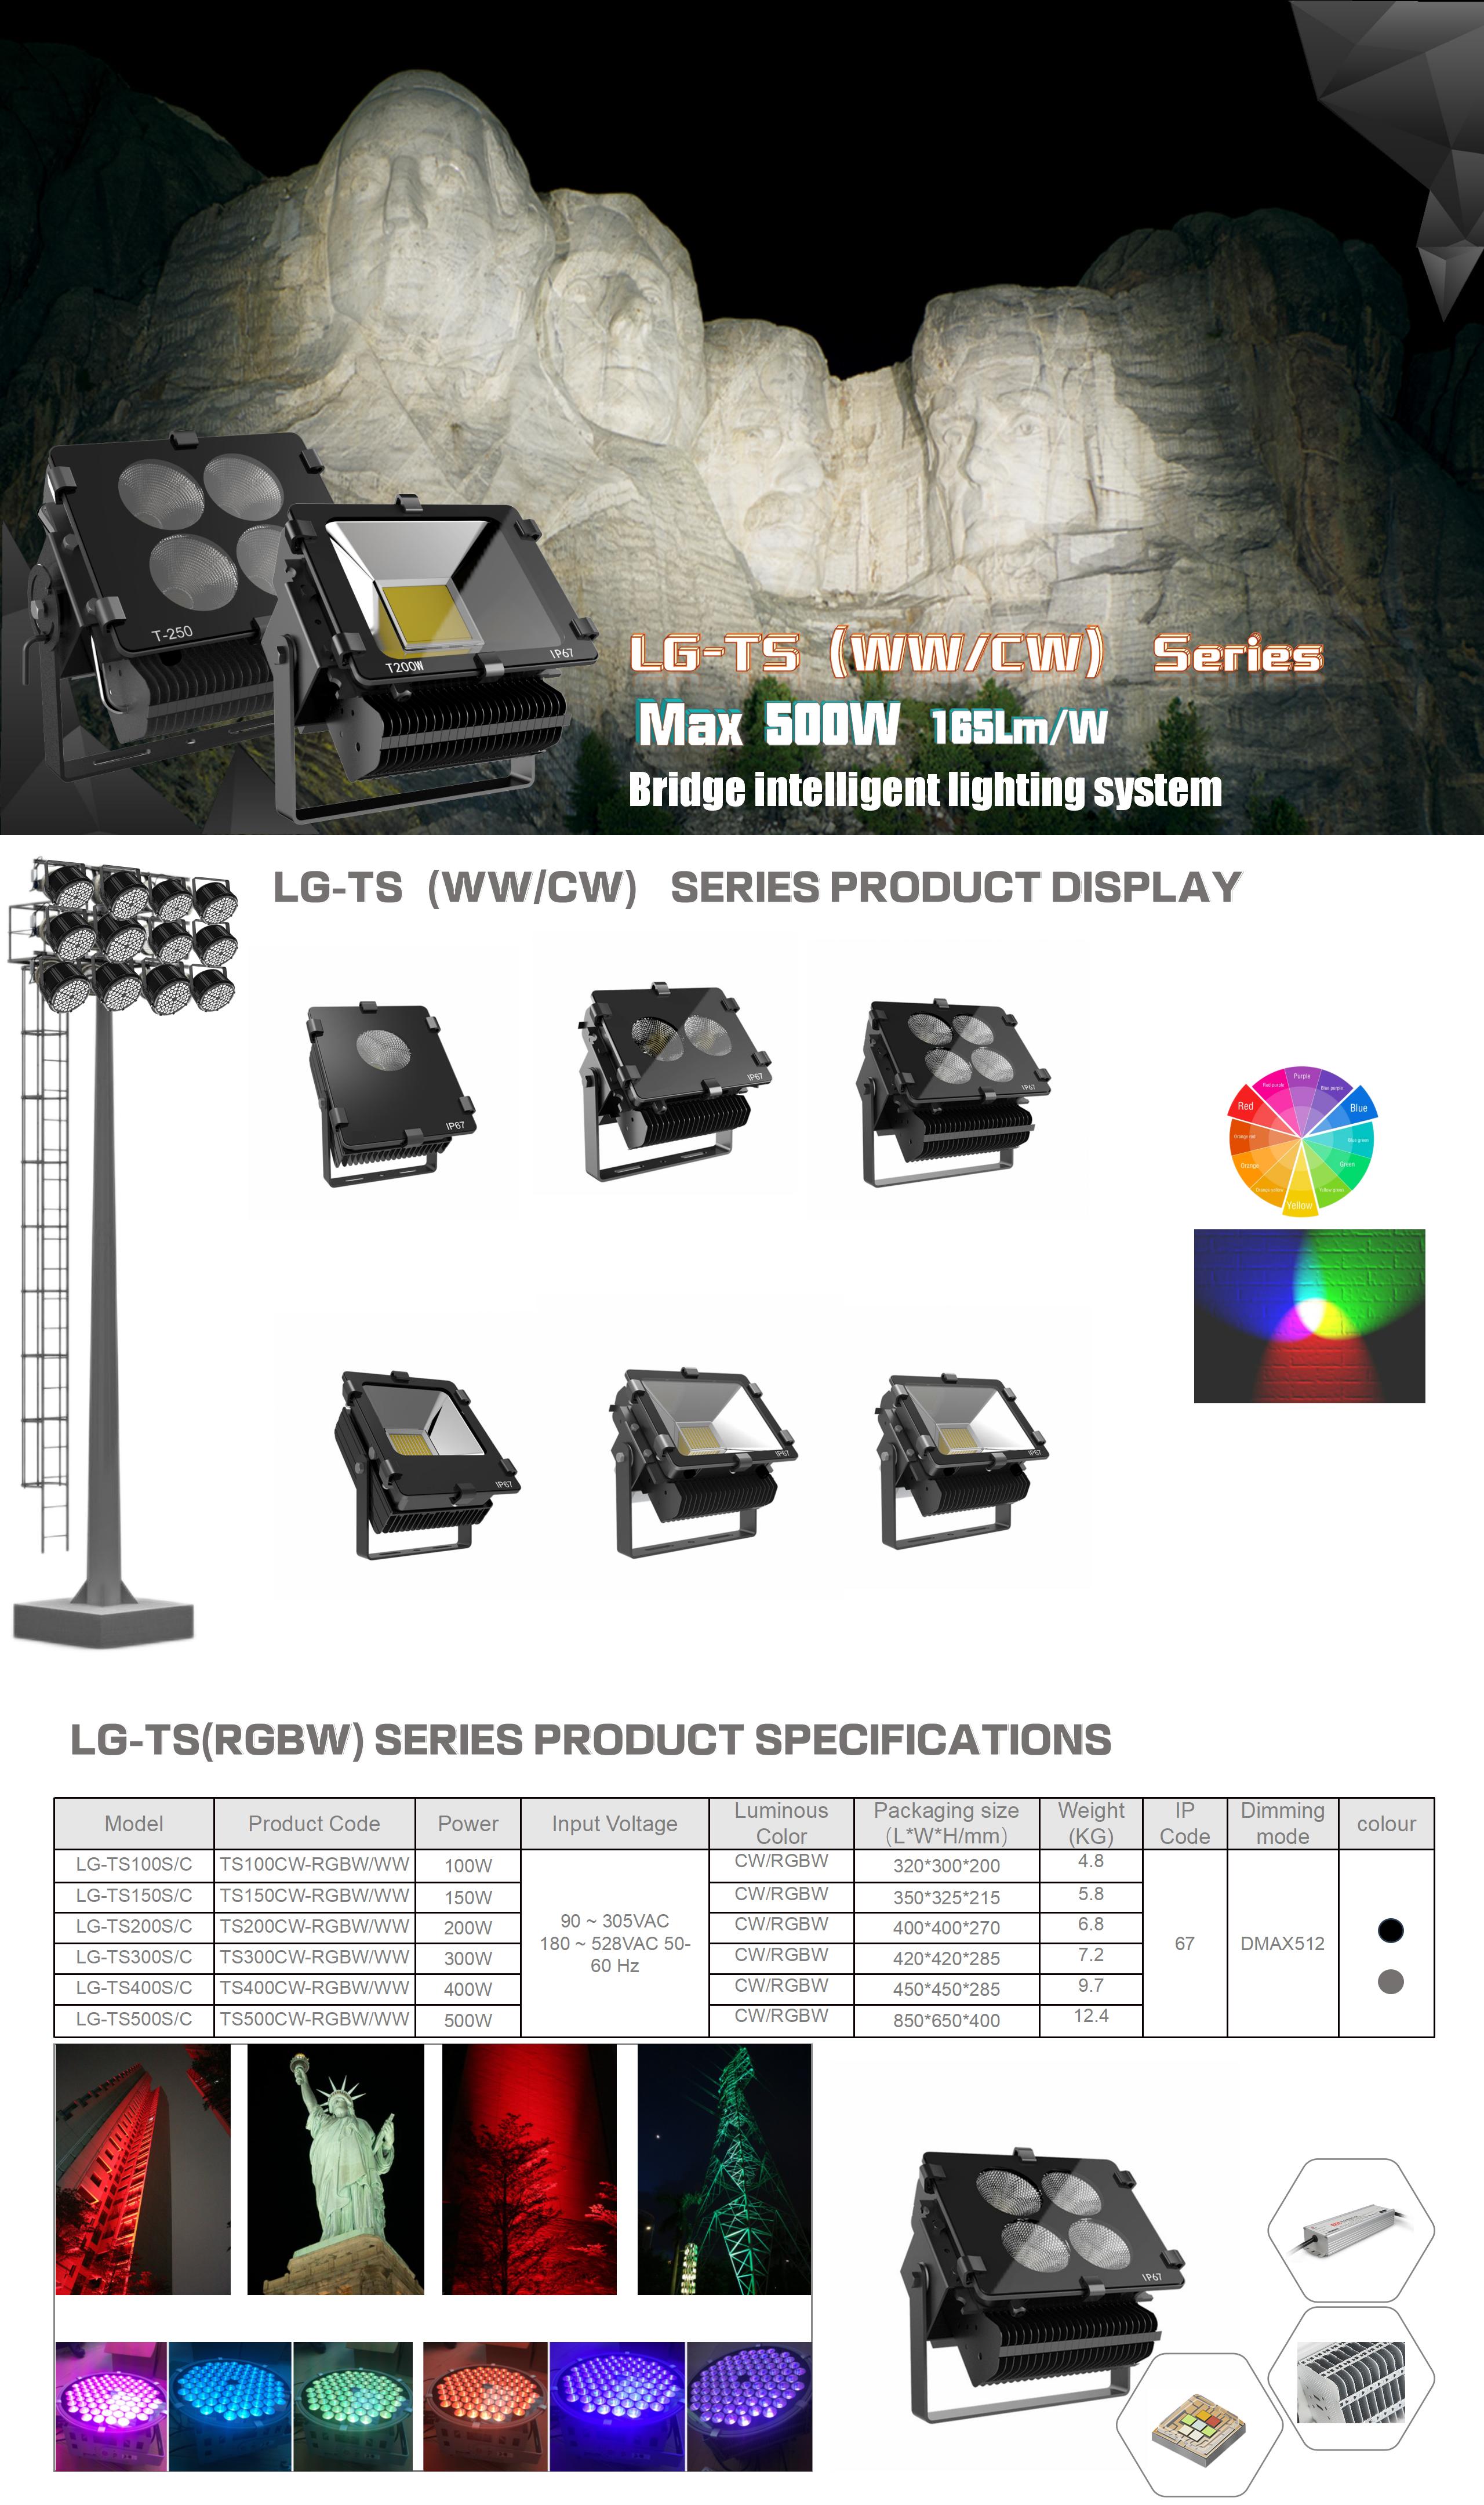 TS series multi-point optical stadium lights (CREE SMD LED) LG-TS100WW/CW-SYN/Y(N:Non-dimming contro